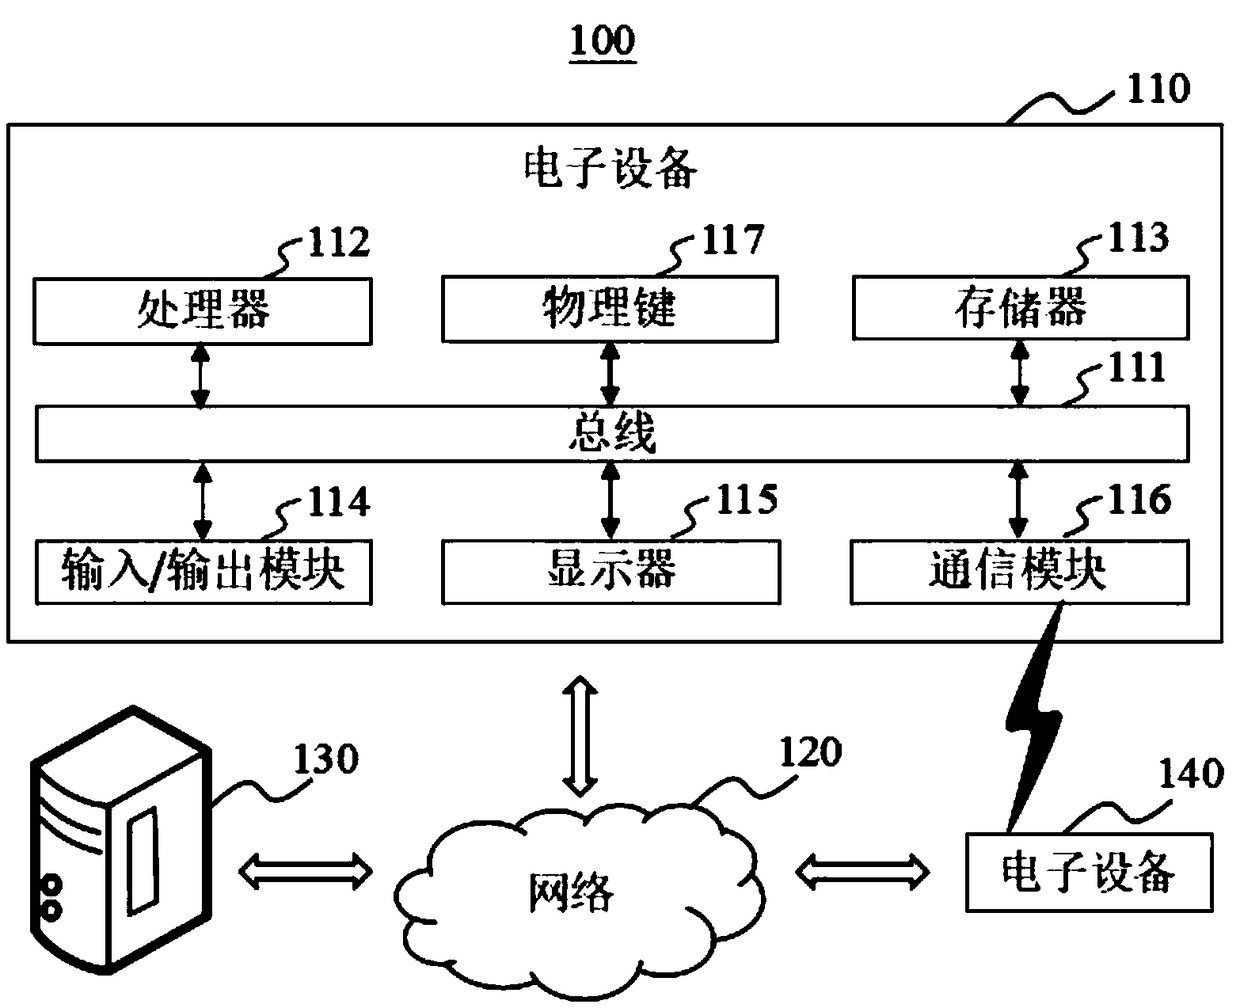 Incoming call processing method based on navigation and terminal